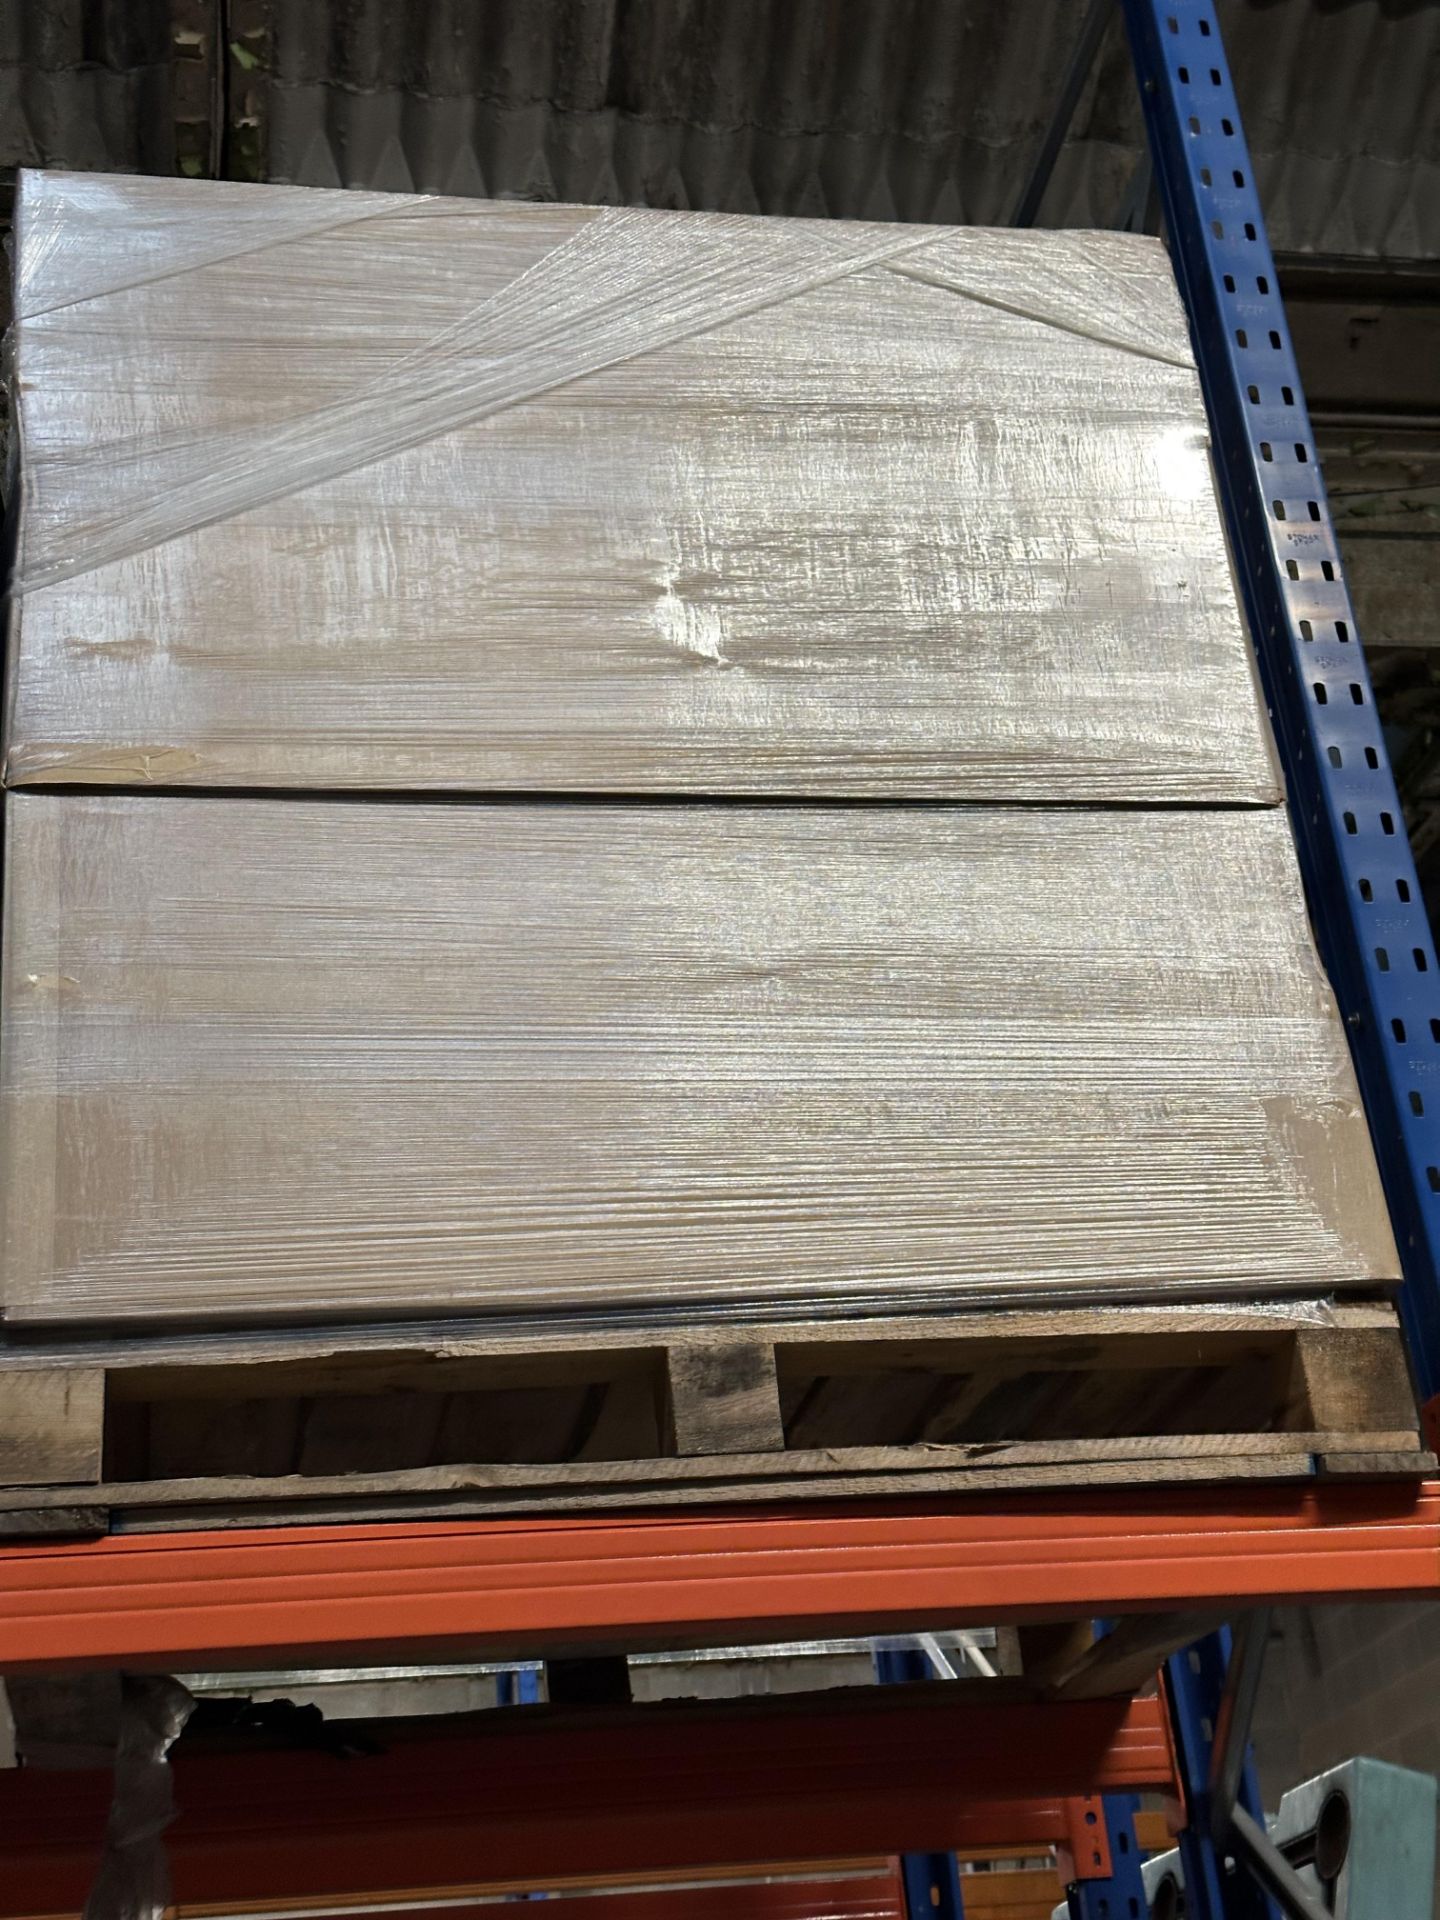 ONE LARGE PALLET TO CONTAIN FACE MASKS